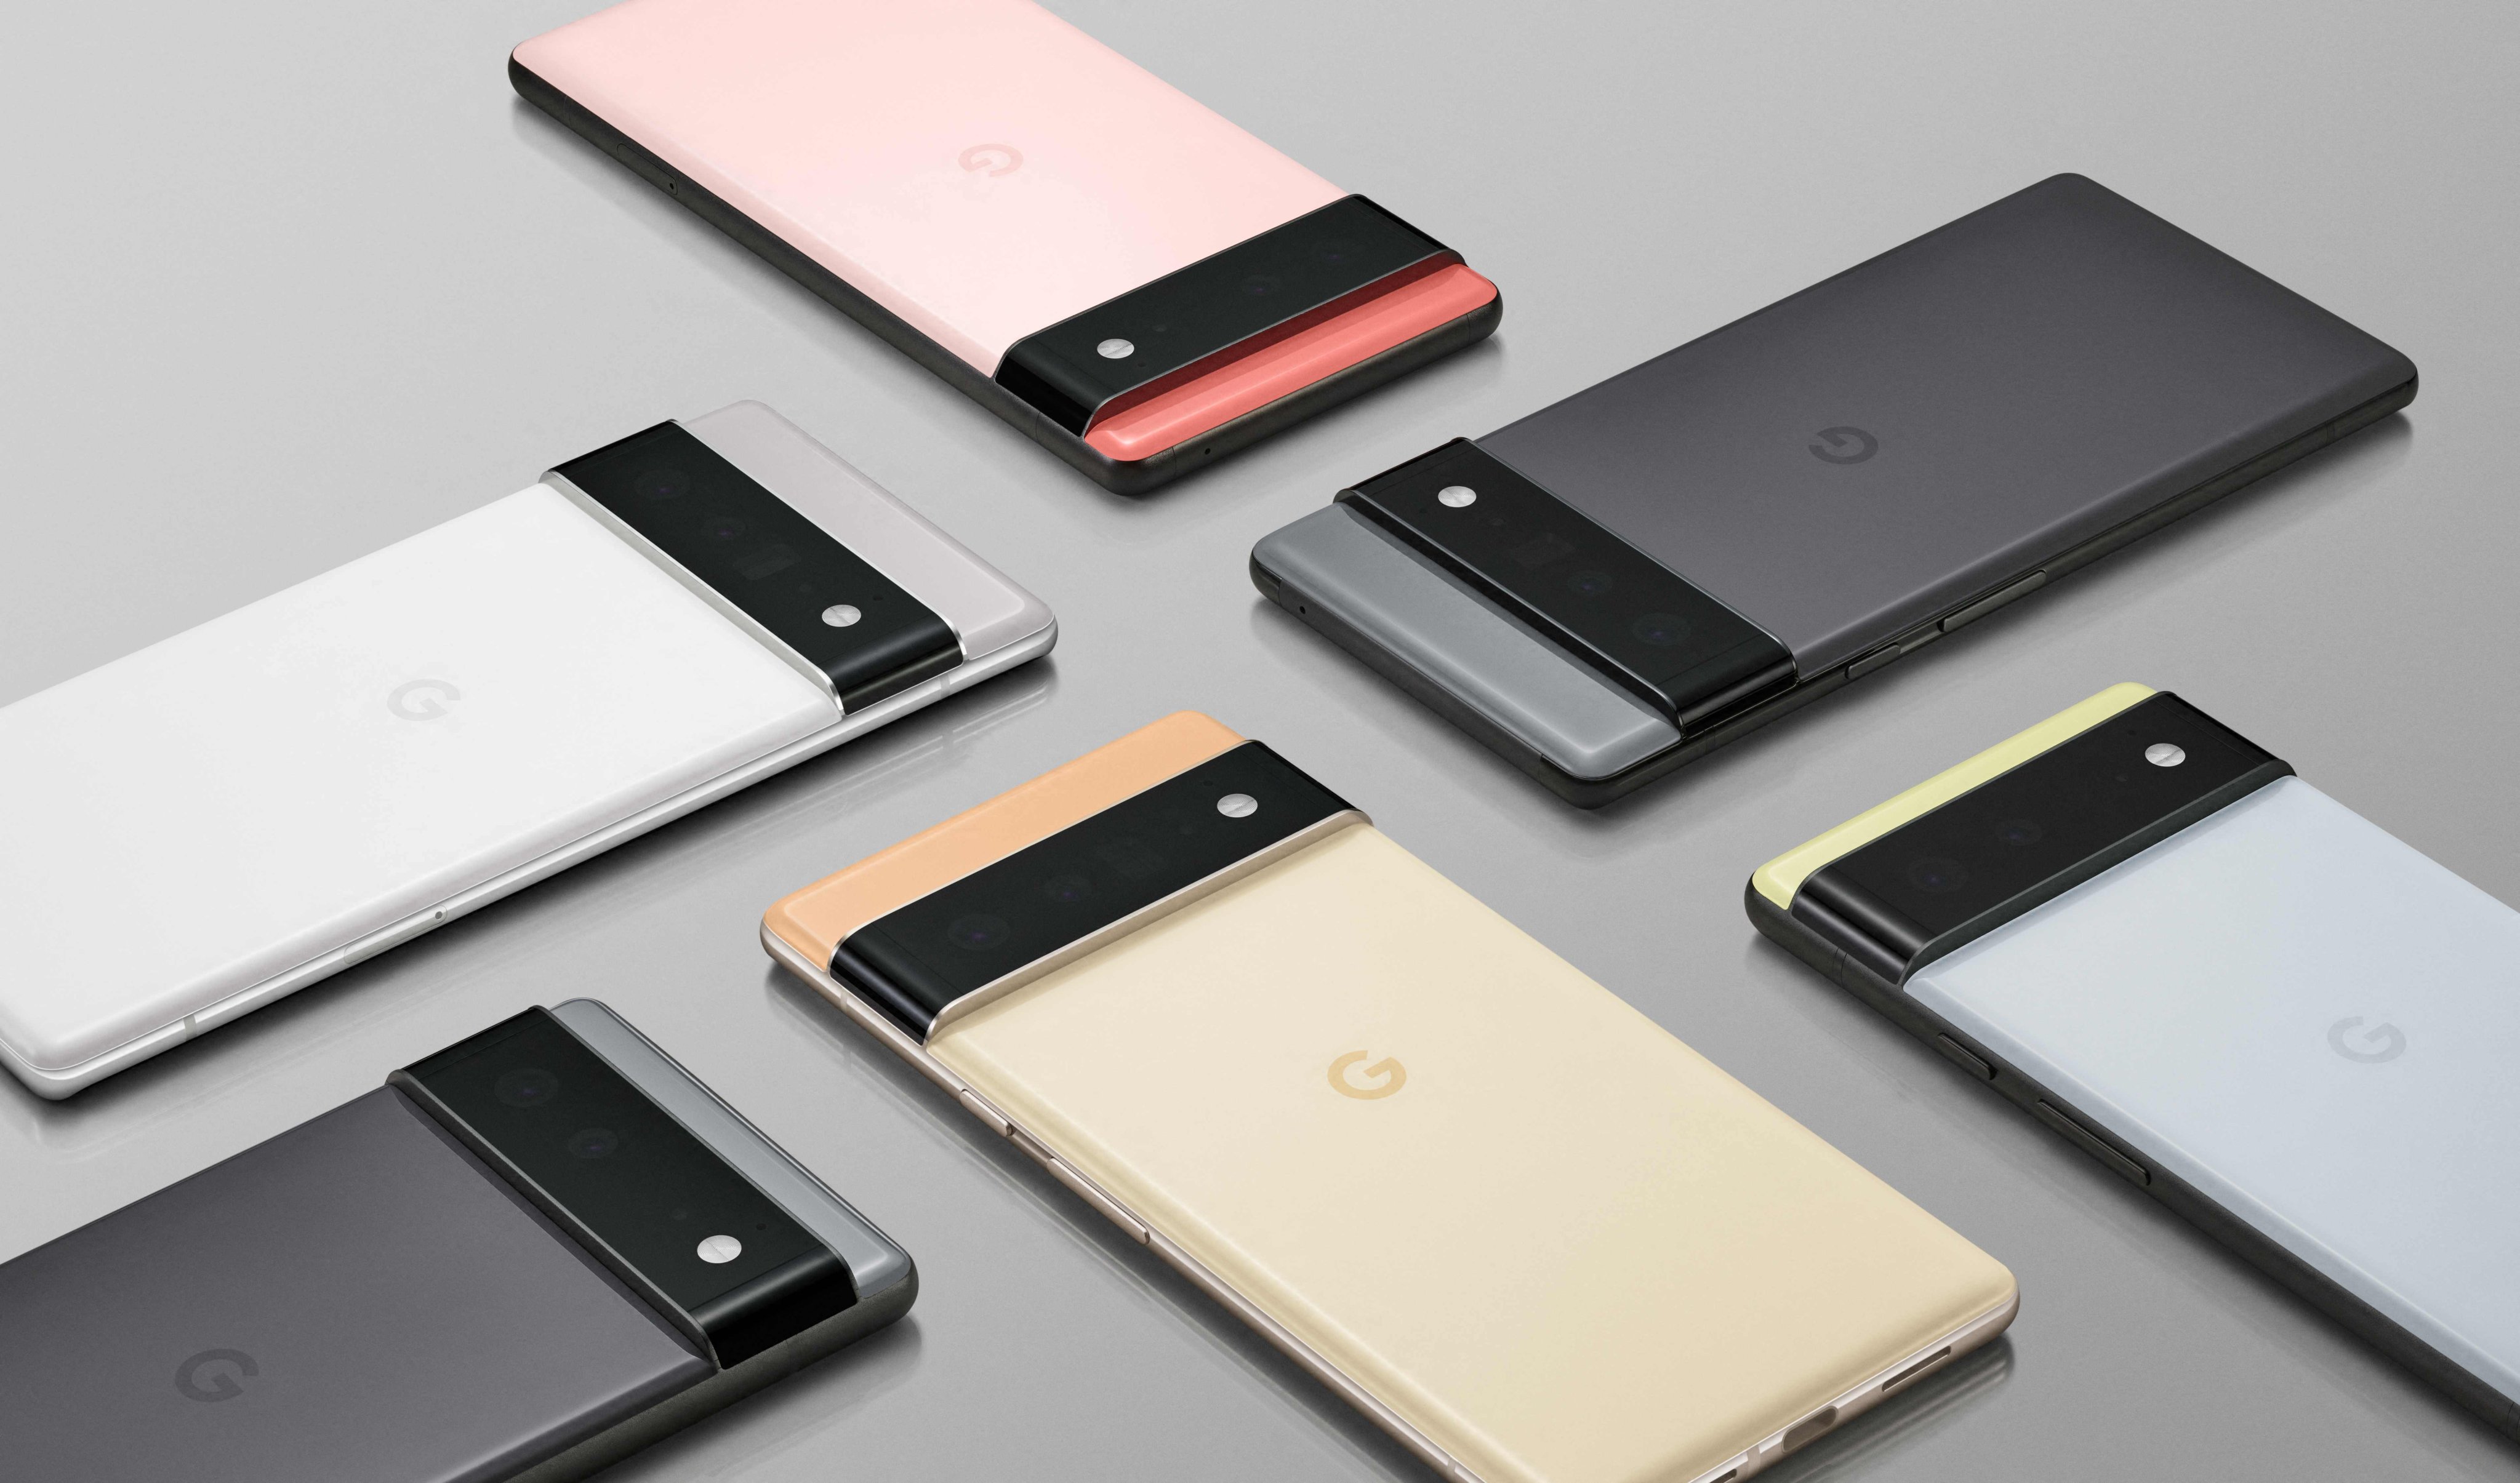 The new Google Pixel 6 and 6 Pro smartphones come in a variety of soft pastel colours. Photo: AFP